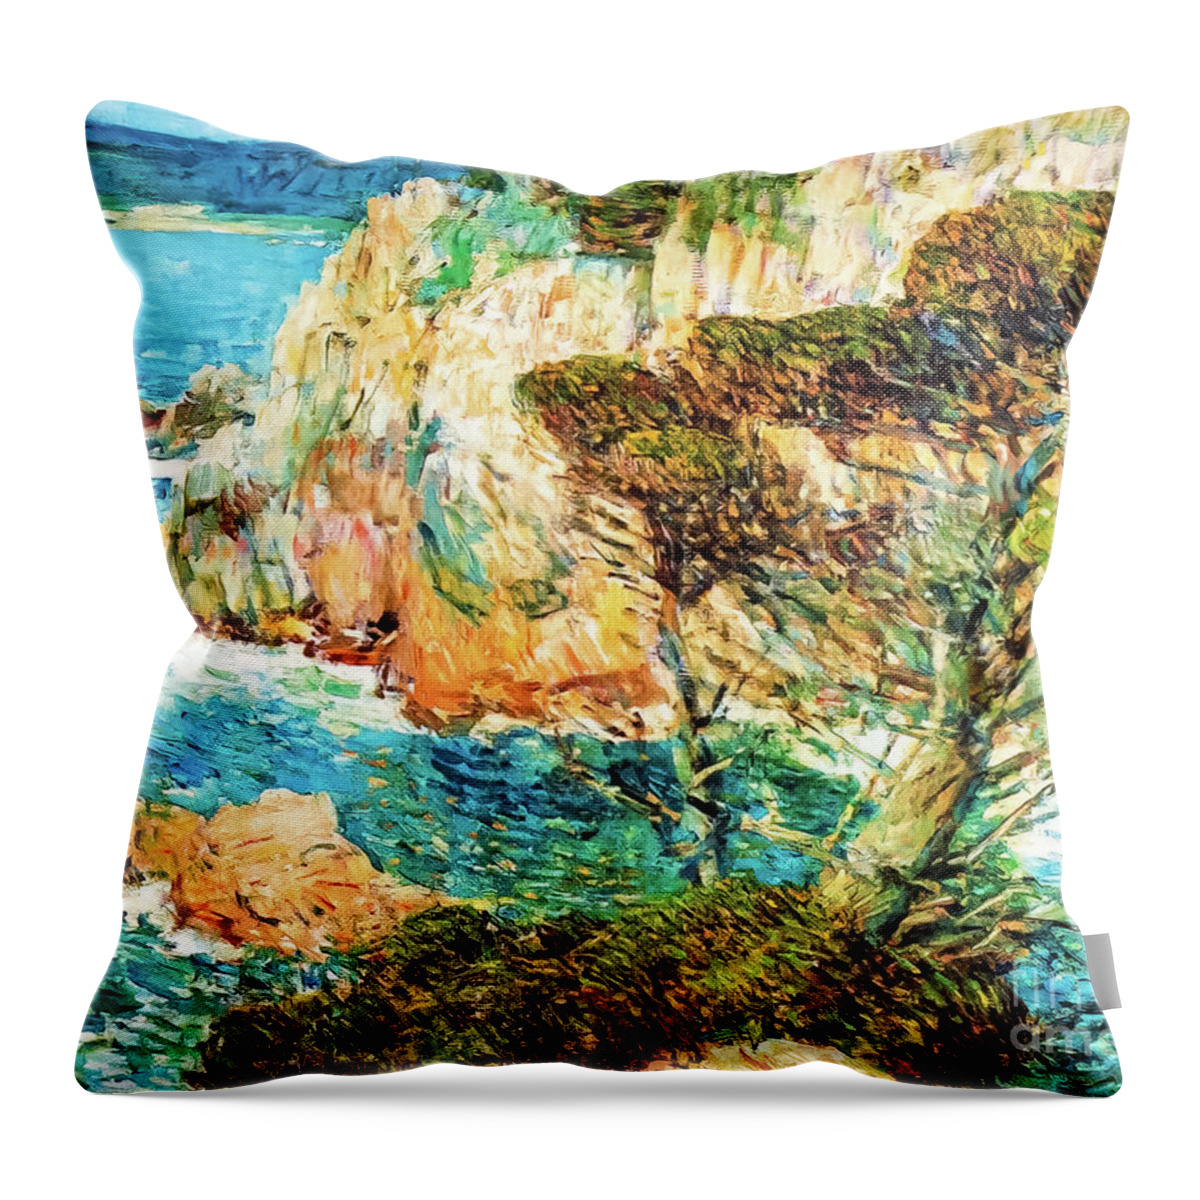 Point Throw Pillow featuring the painting Point Lobos, Carmel by Childe Hassam 1914 by Childe Hassam